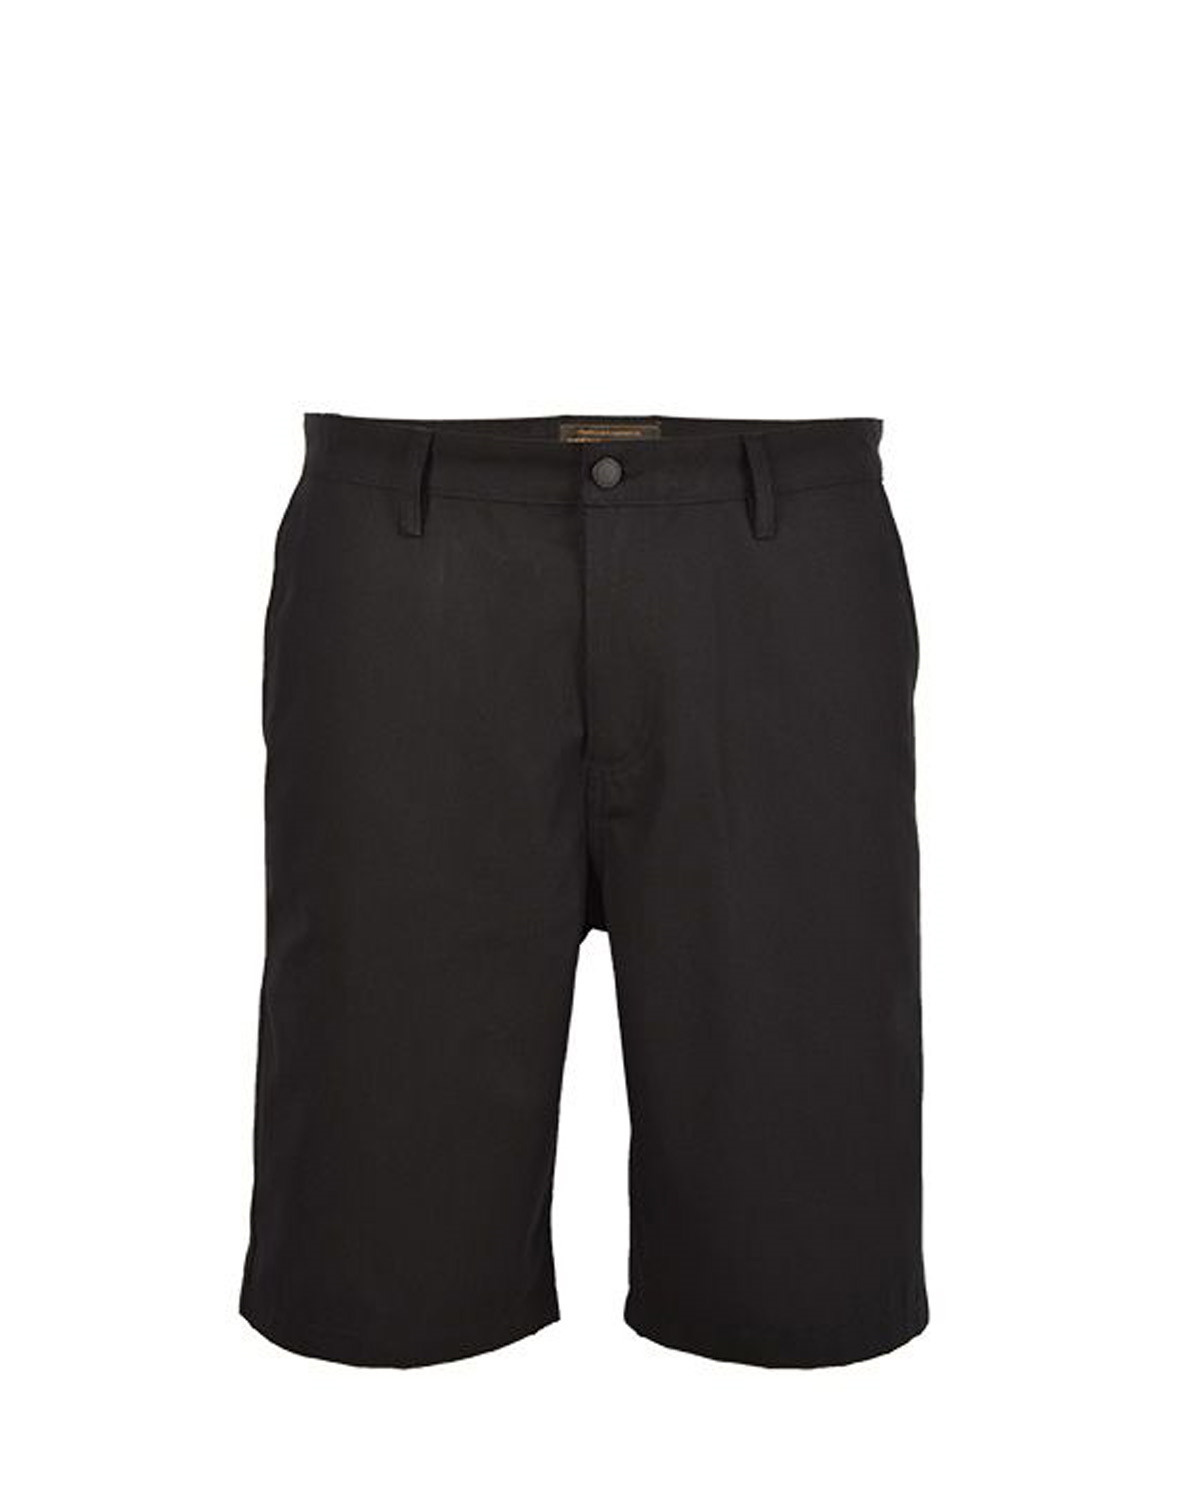 WRENCHMONKEES Simple Shorts (Sort, W31)